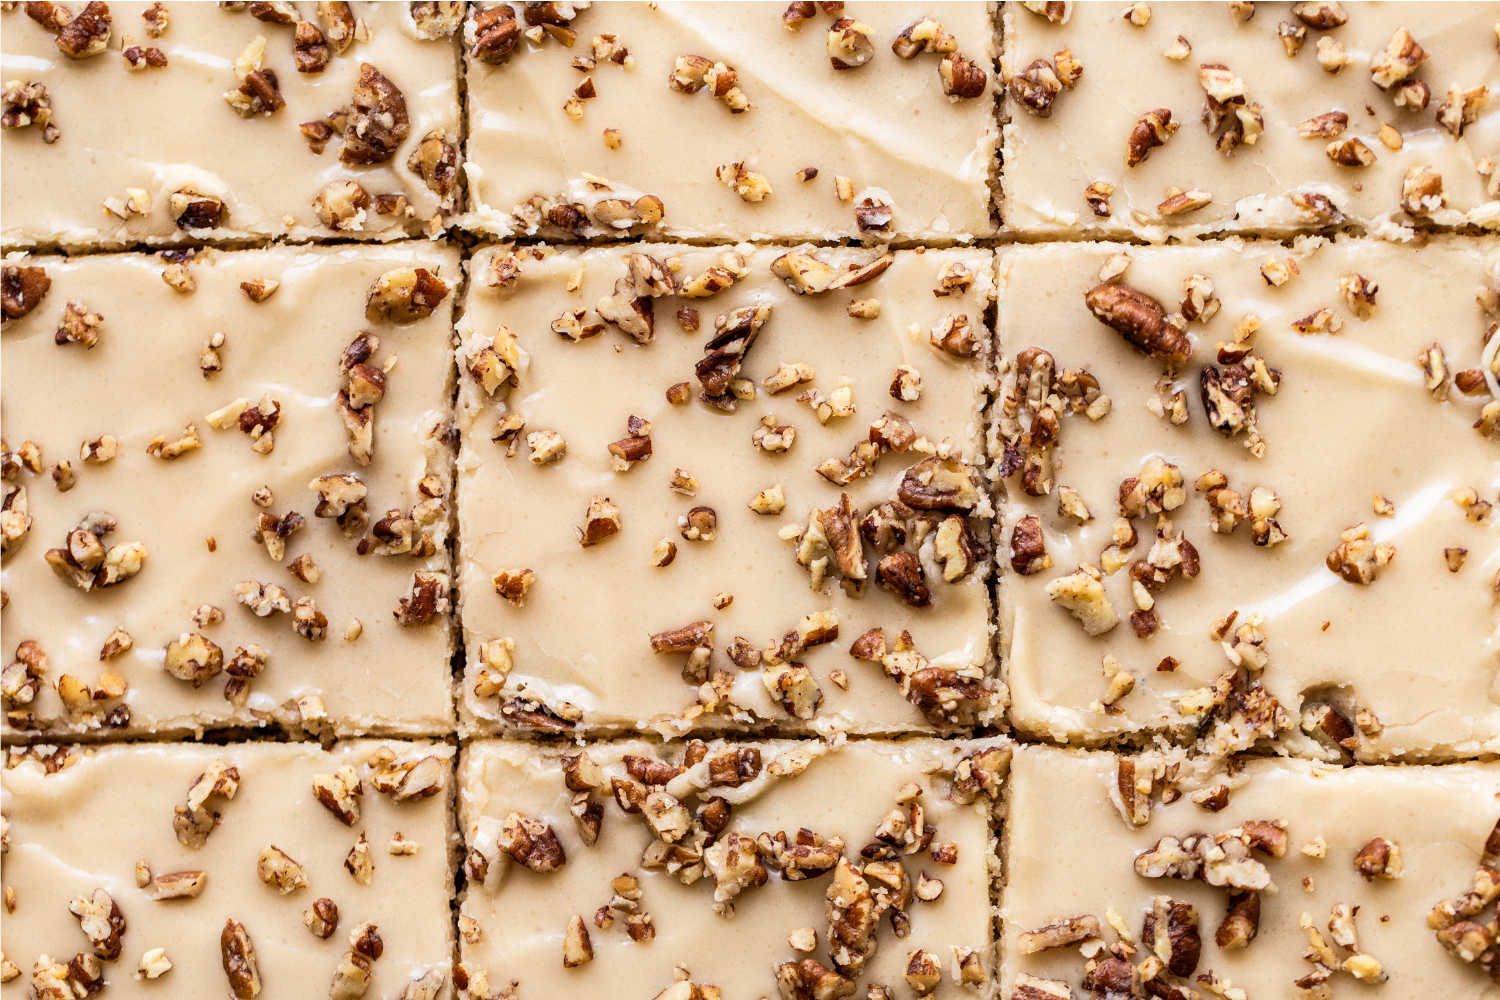 iced cake topped with buttery pecan pieces, sliced and ready to serve